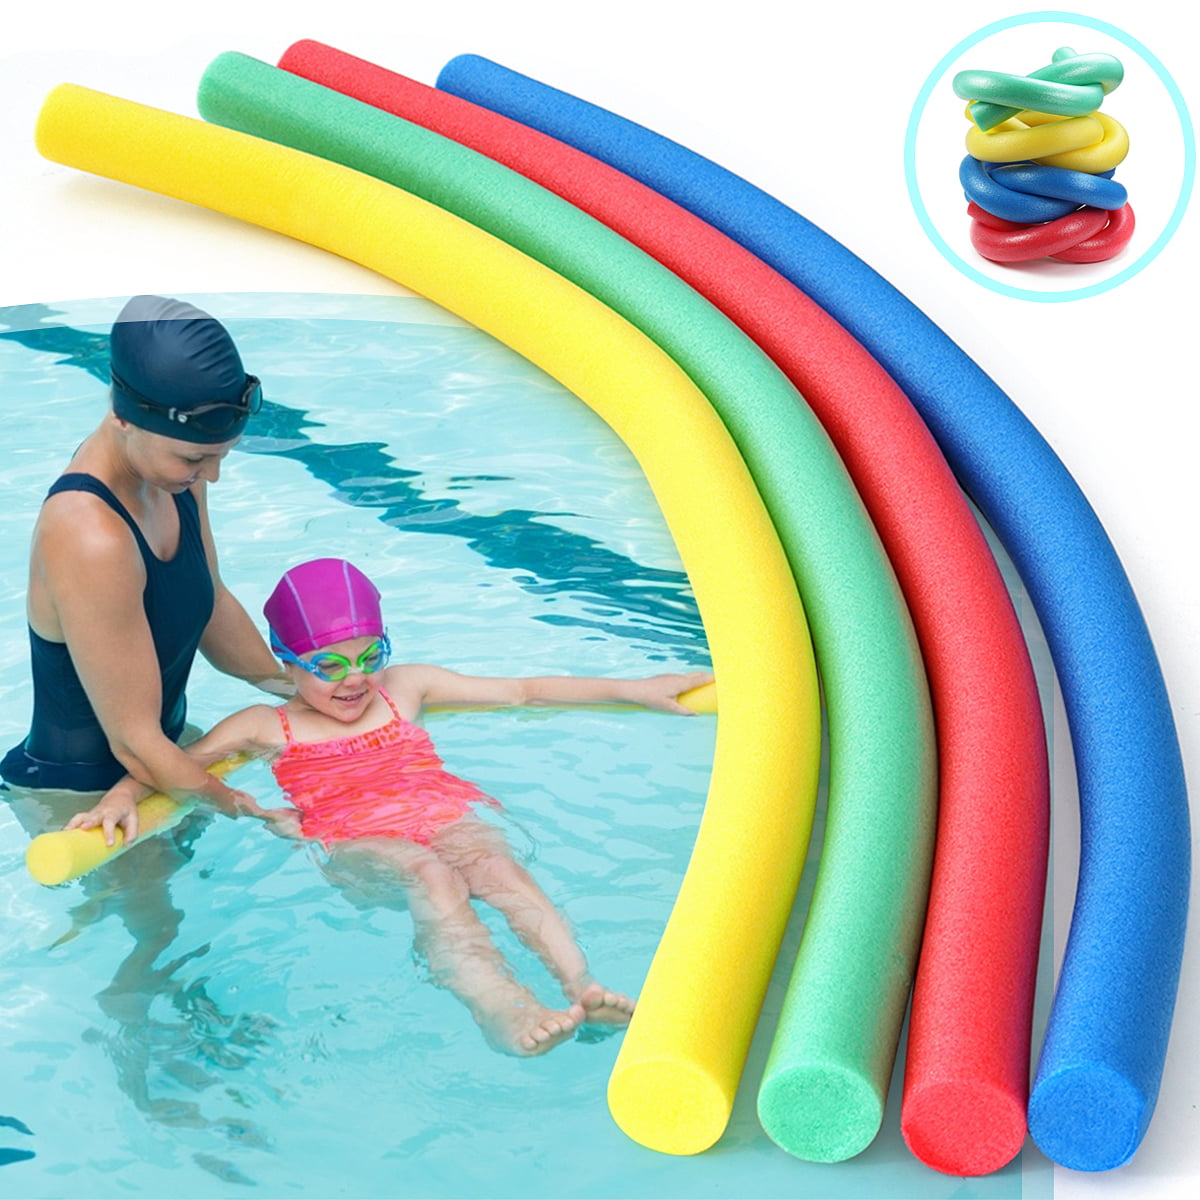 6 x Floating Pool Noodle Hollow Foam Tube for Swim Training Water Relaxation 